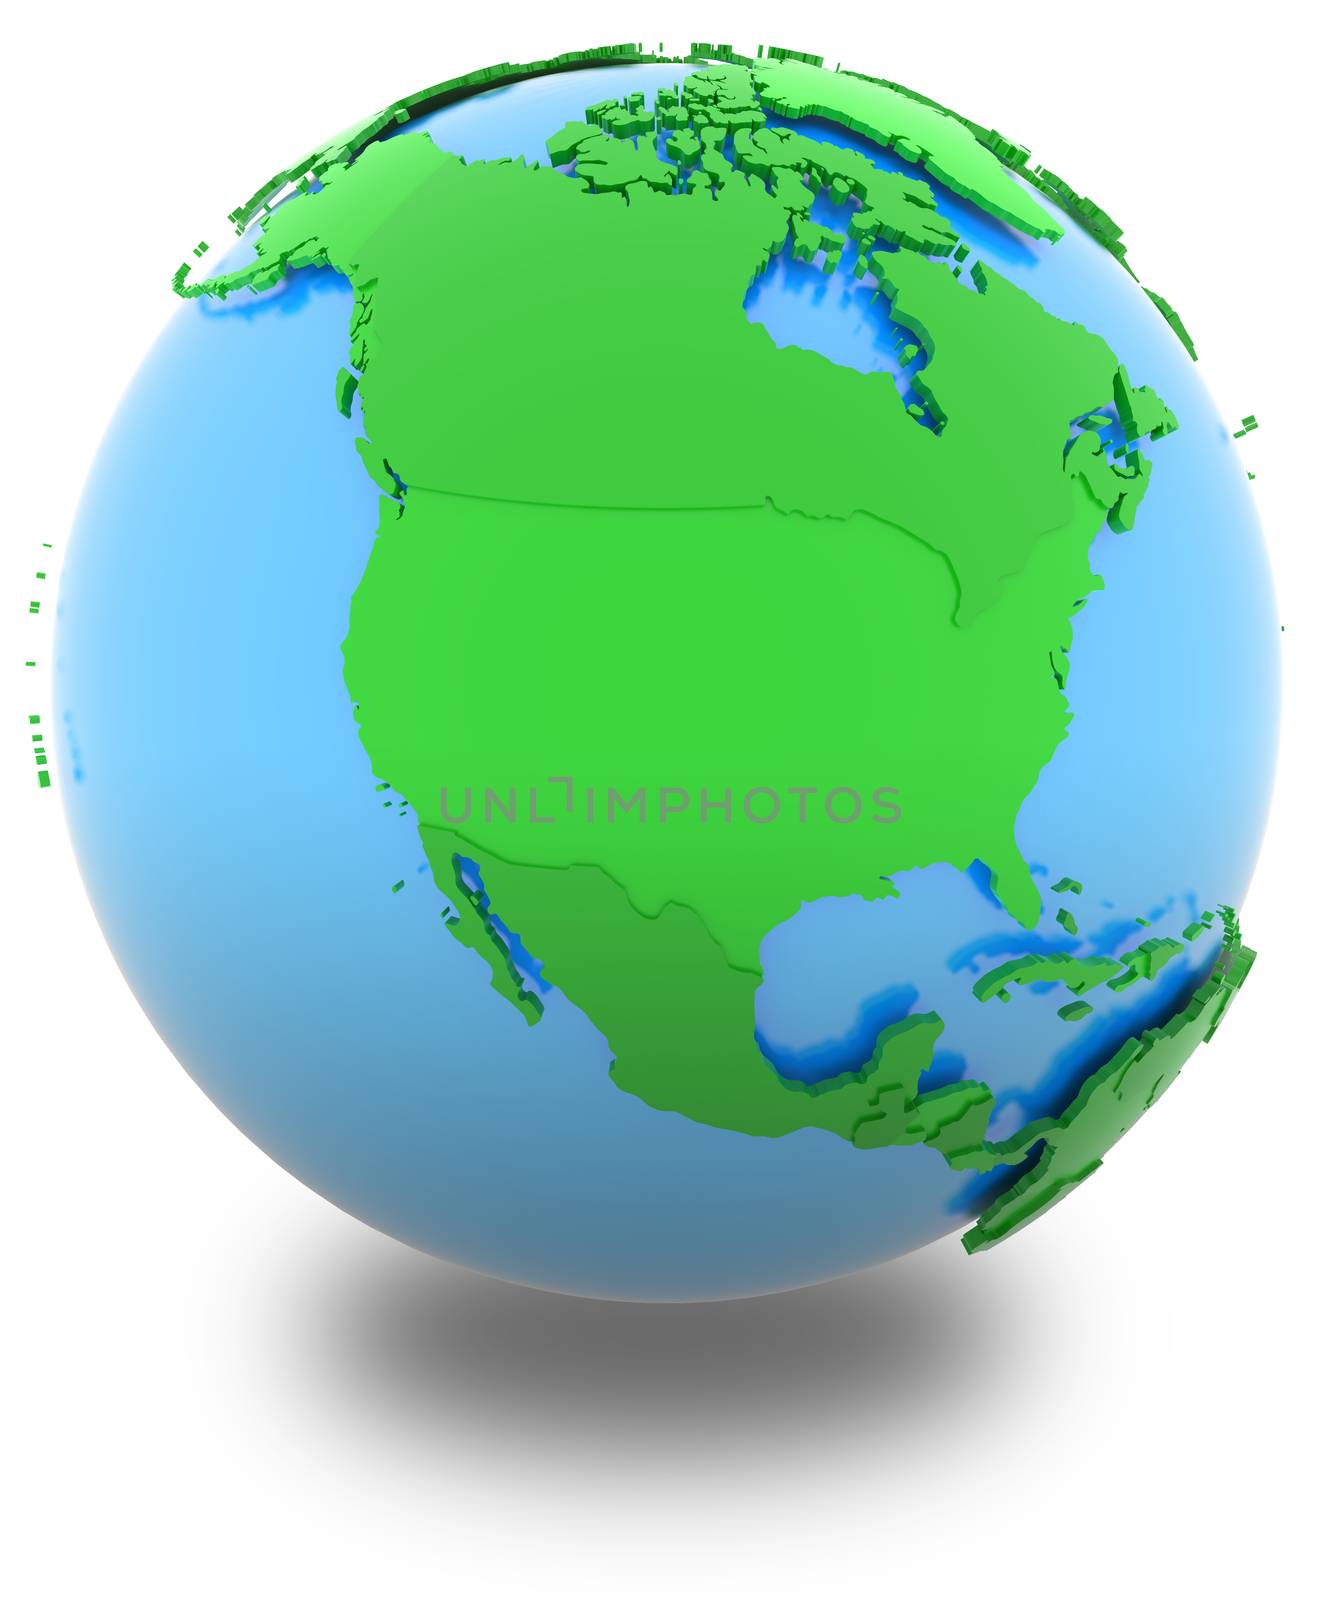 North America, political map of the world with countries in different shades of green, isolated on white background. 